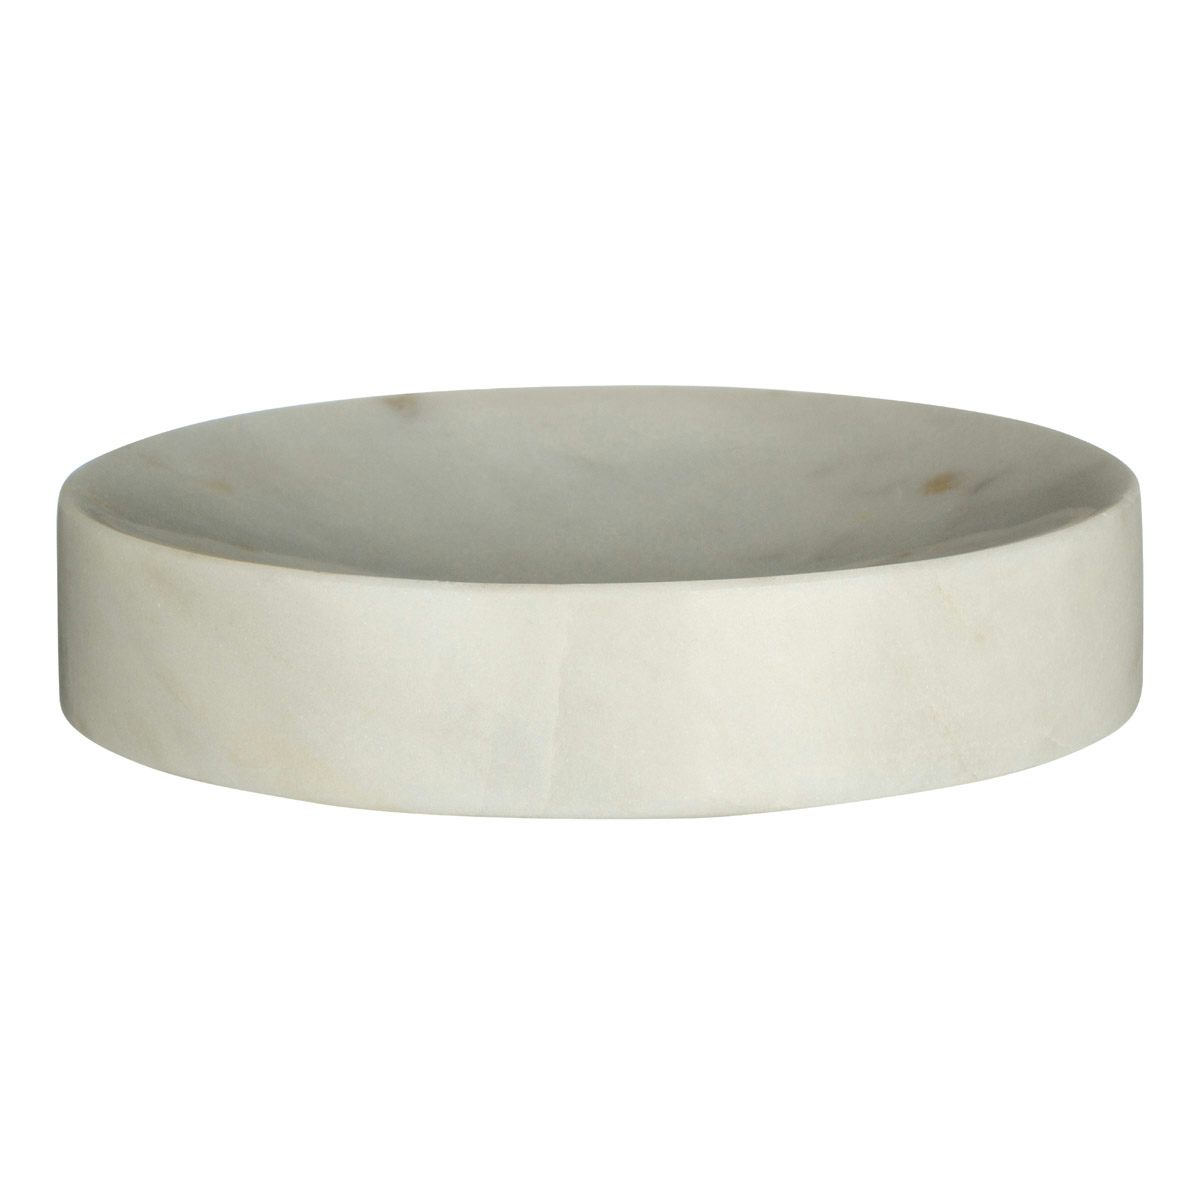 Accents White marble soap dish